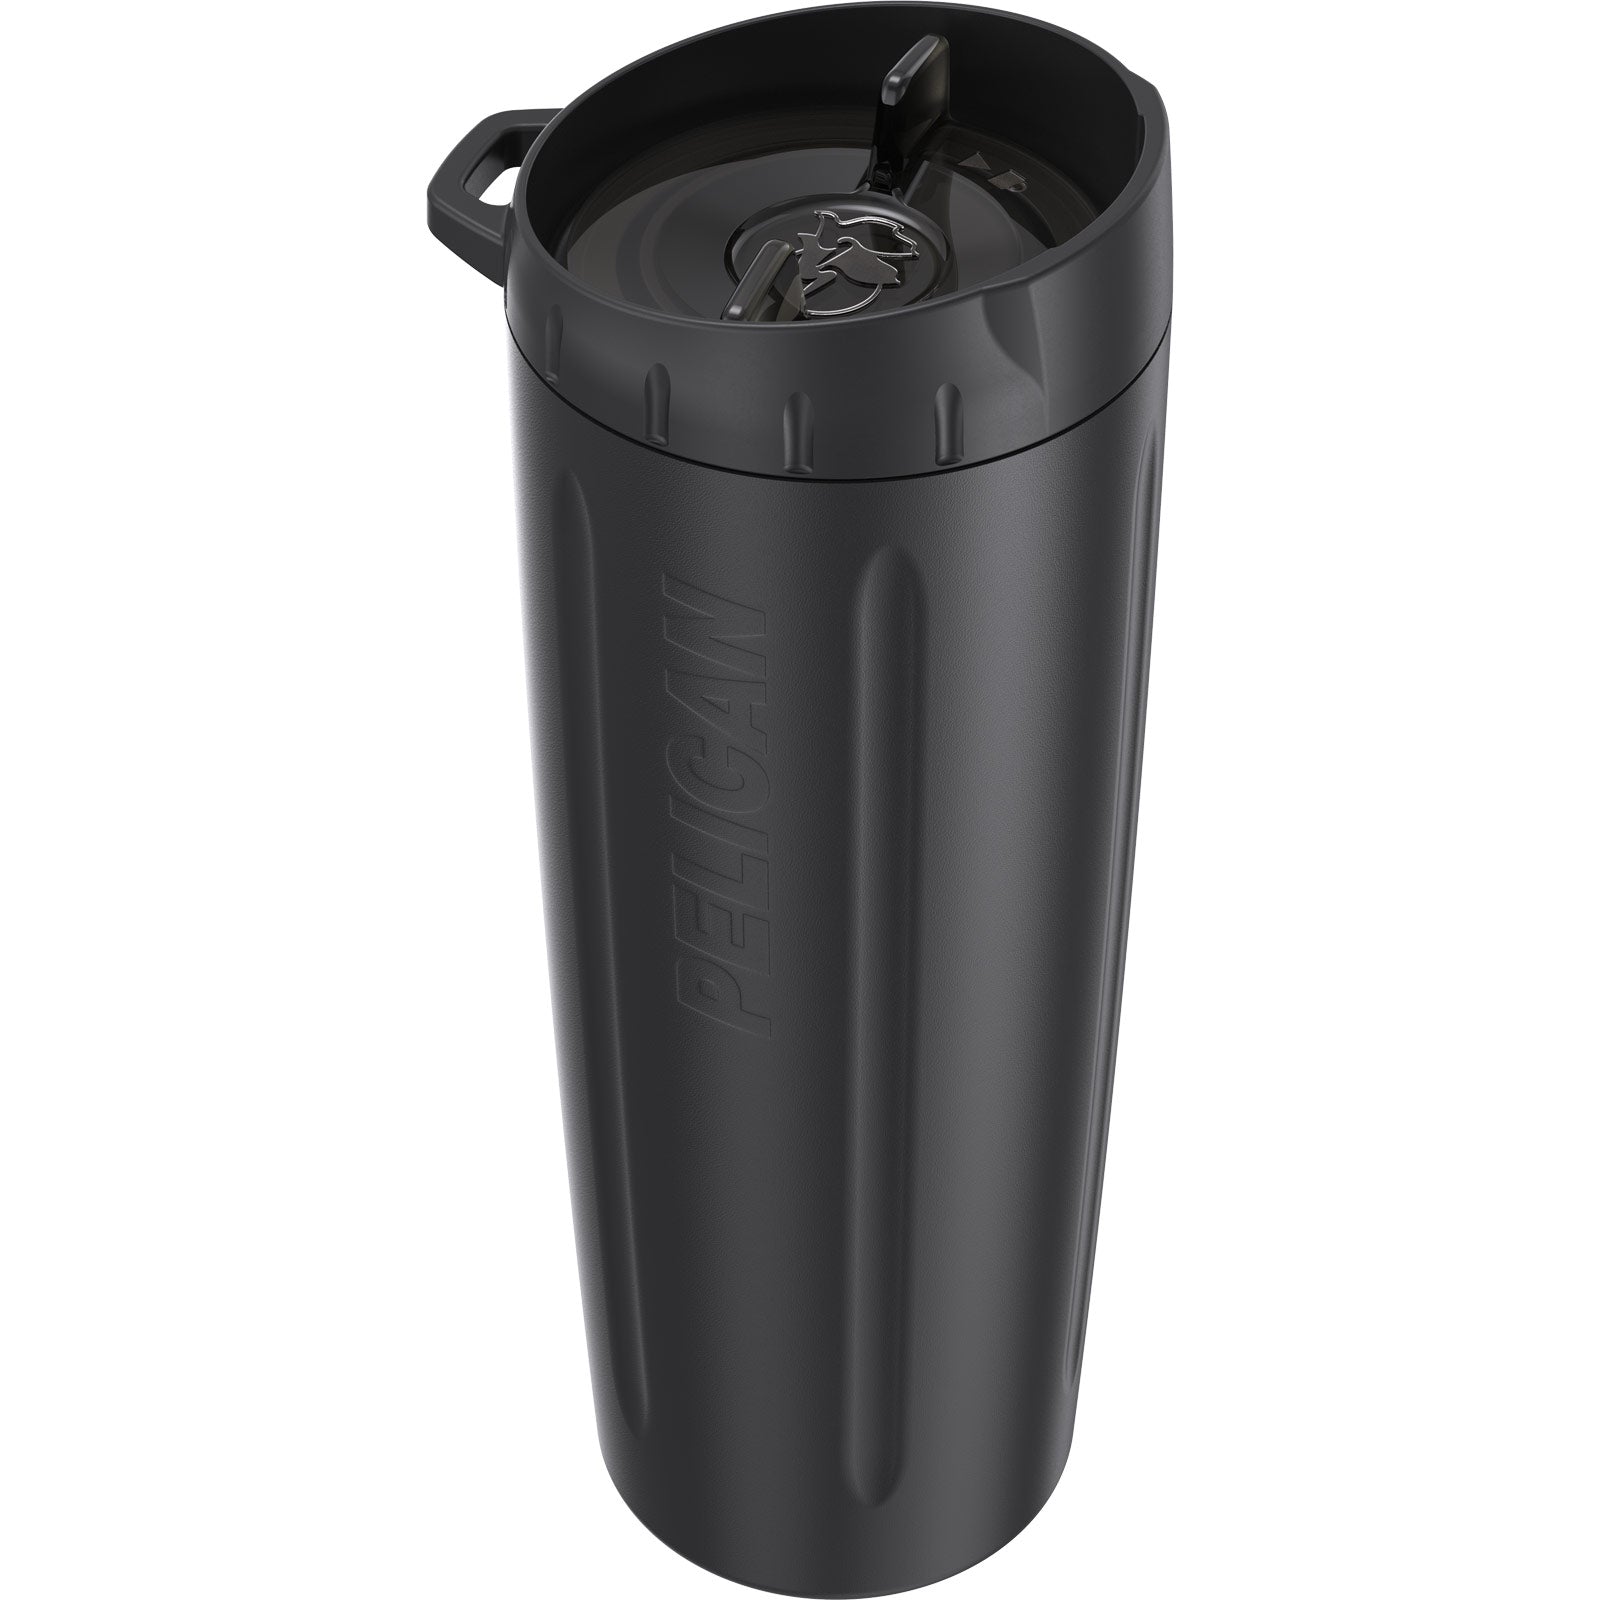 Pelican Products Dayventure Tumbler 10 oz, 16 oz, or 22 oz - Survival & Outdoors